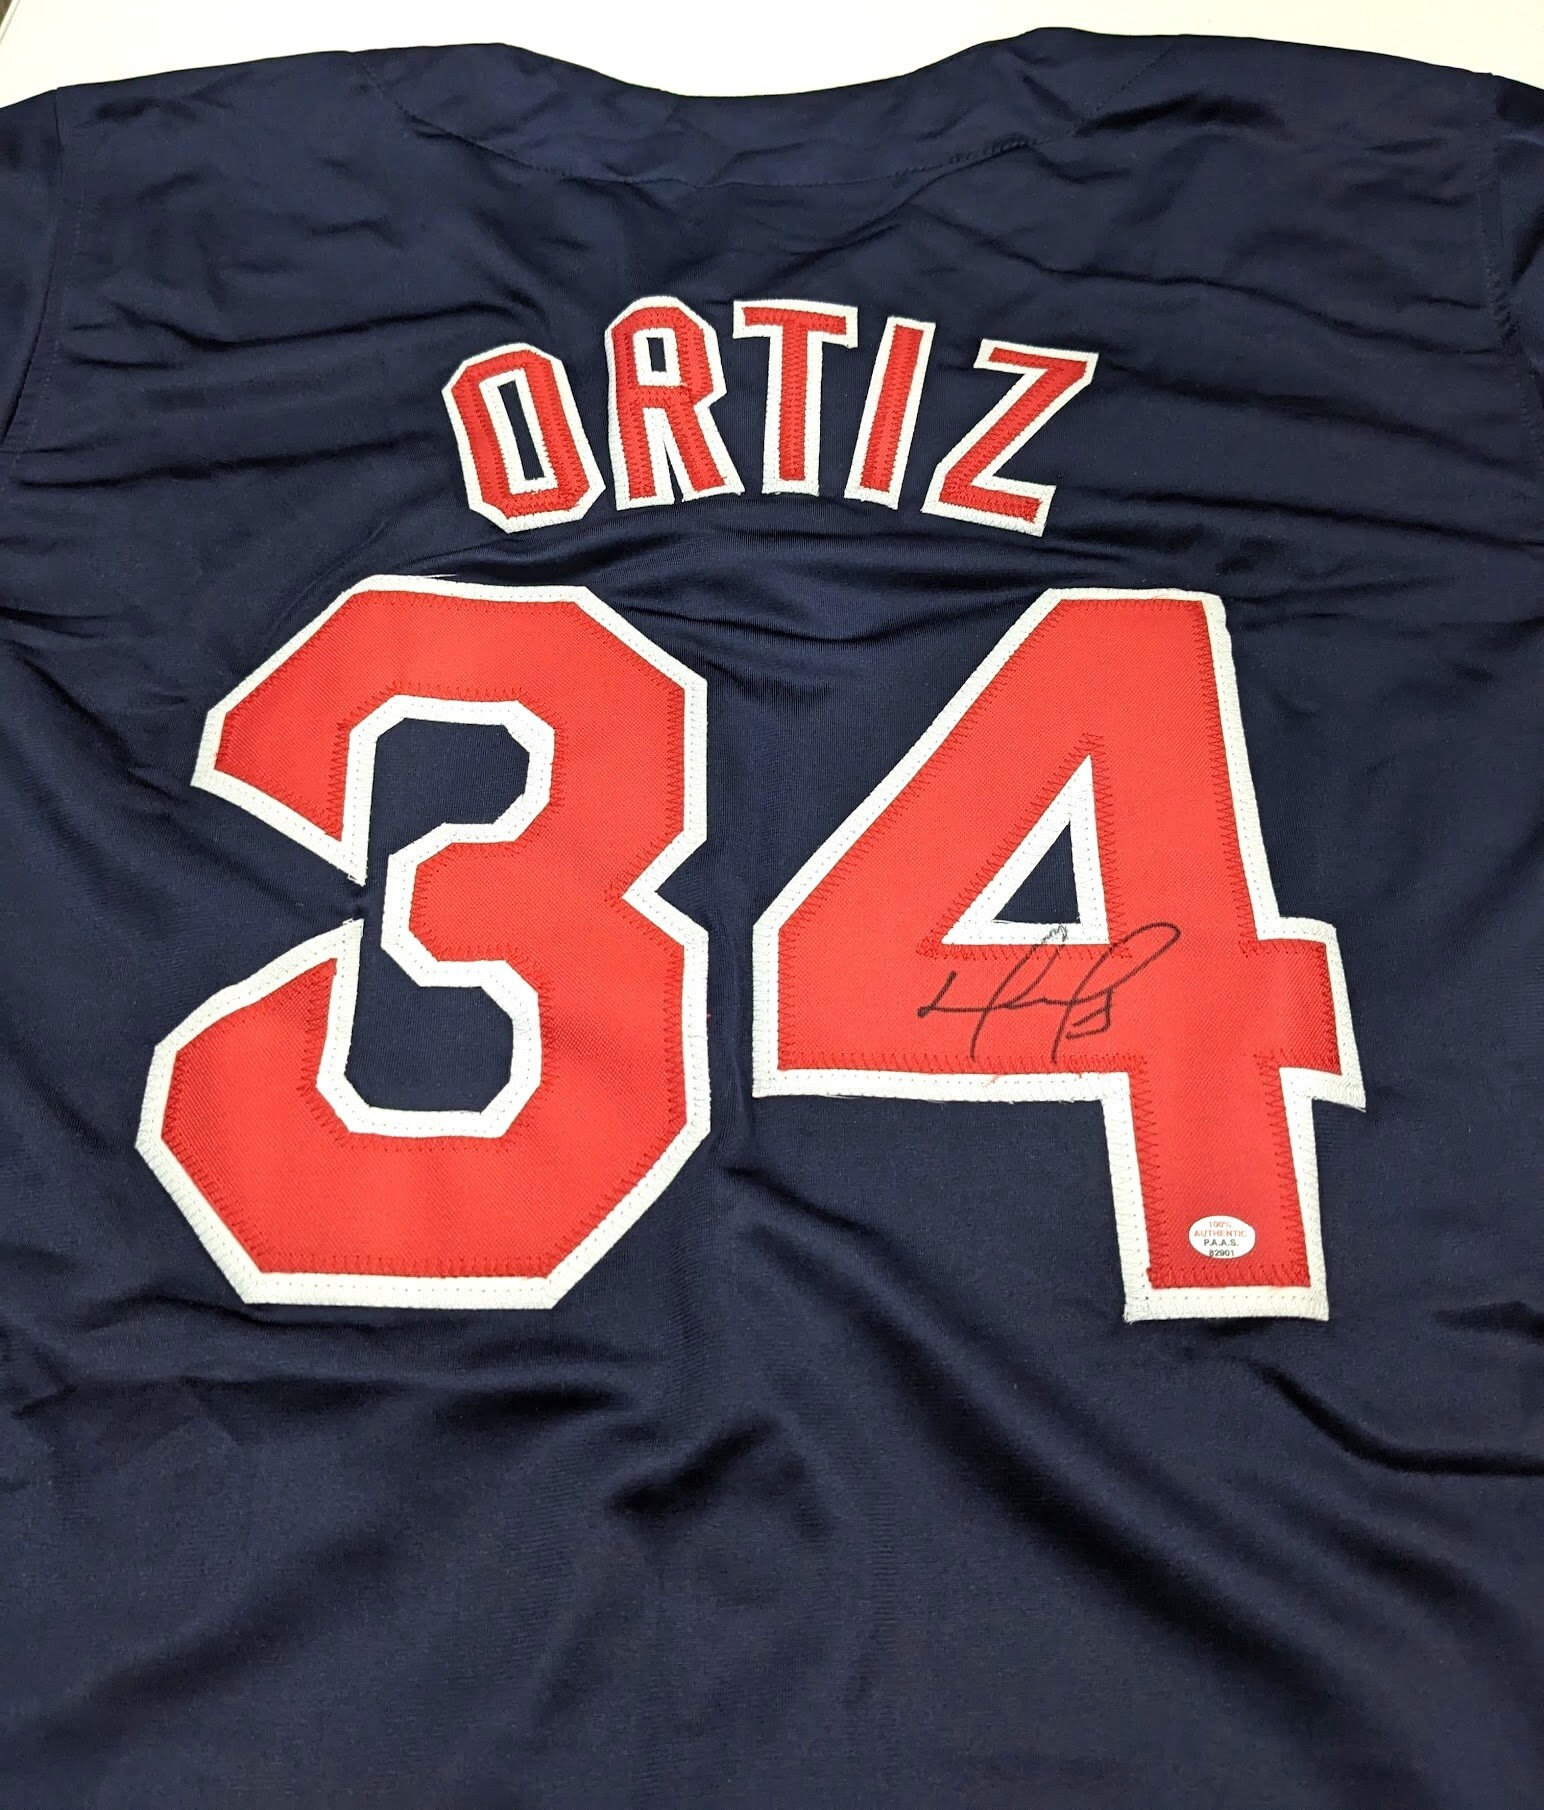 Ortiz Official Adult Home Red Sox Jersey